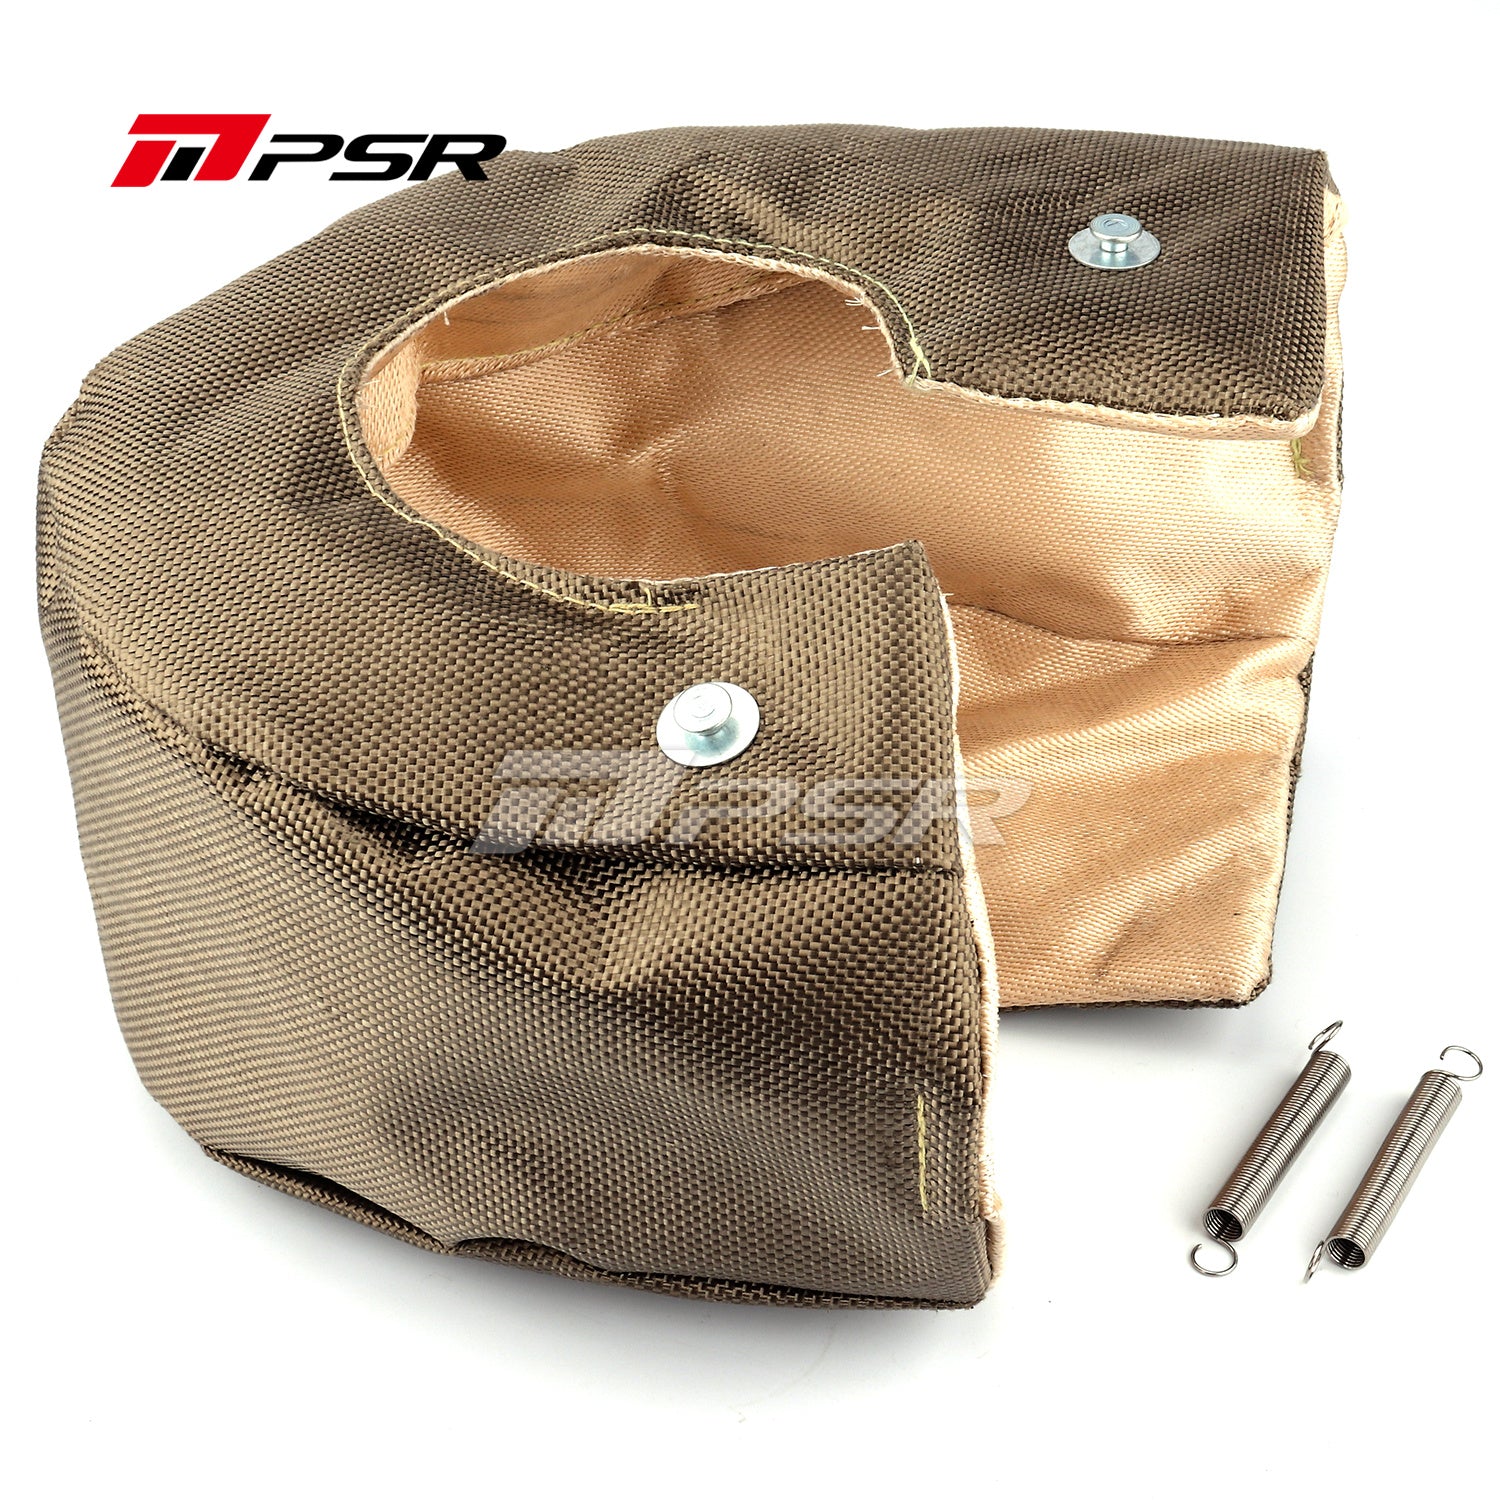 PULSAR TURBO BLANKET for GT28 GT30 GT35 G25 G30 G35 S300 S400 GTP38/R series Turbos